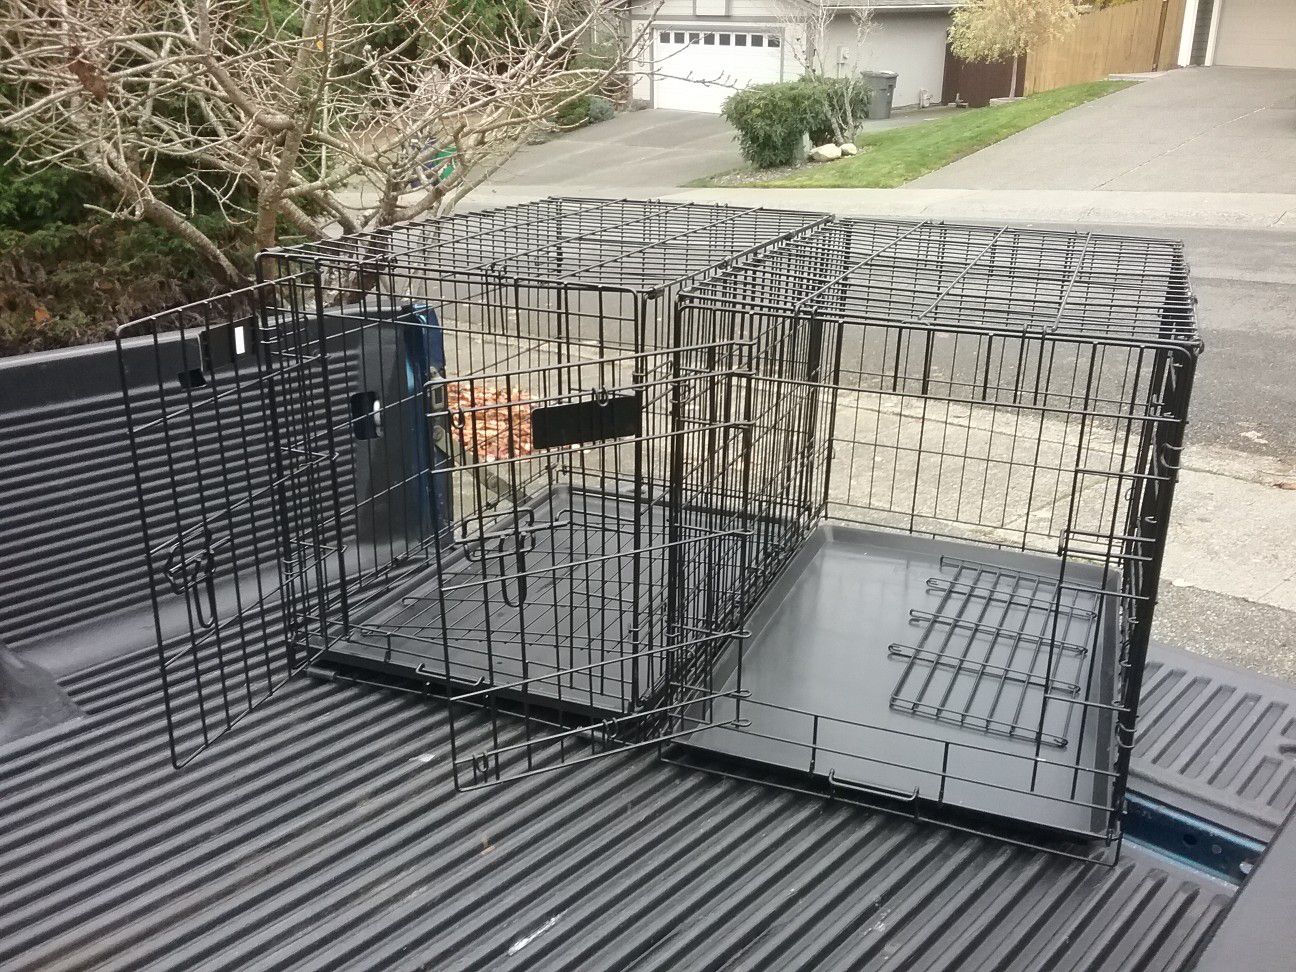 Medium Dog Kennel Crate like New 30” L by 19” W 21”H $35 Each